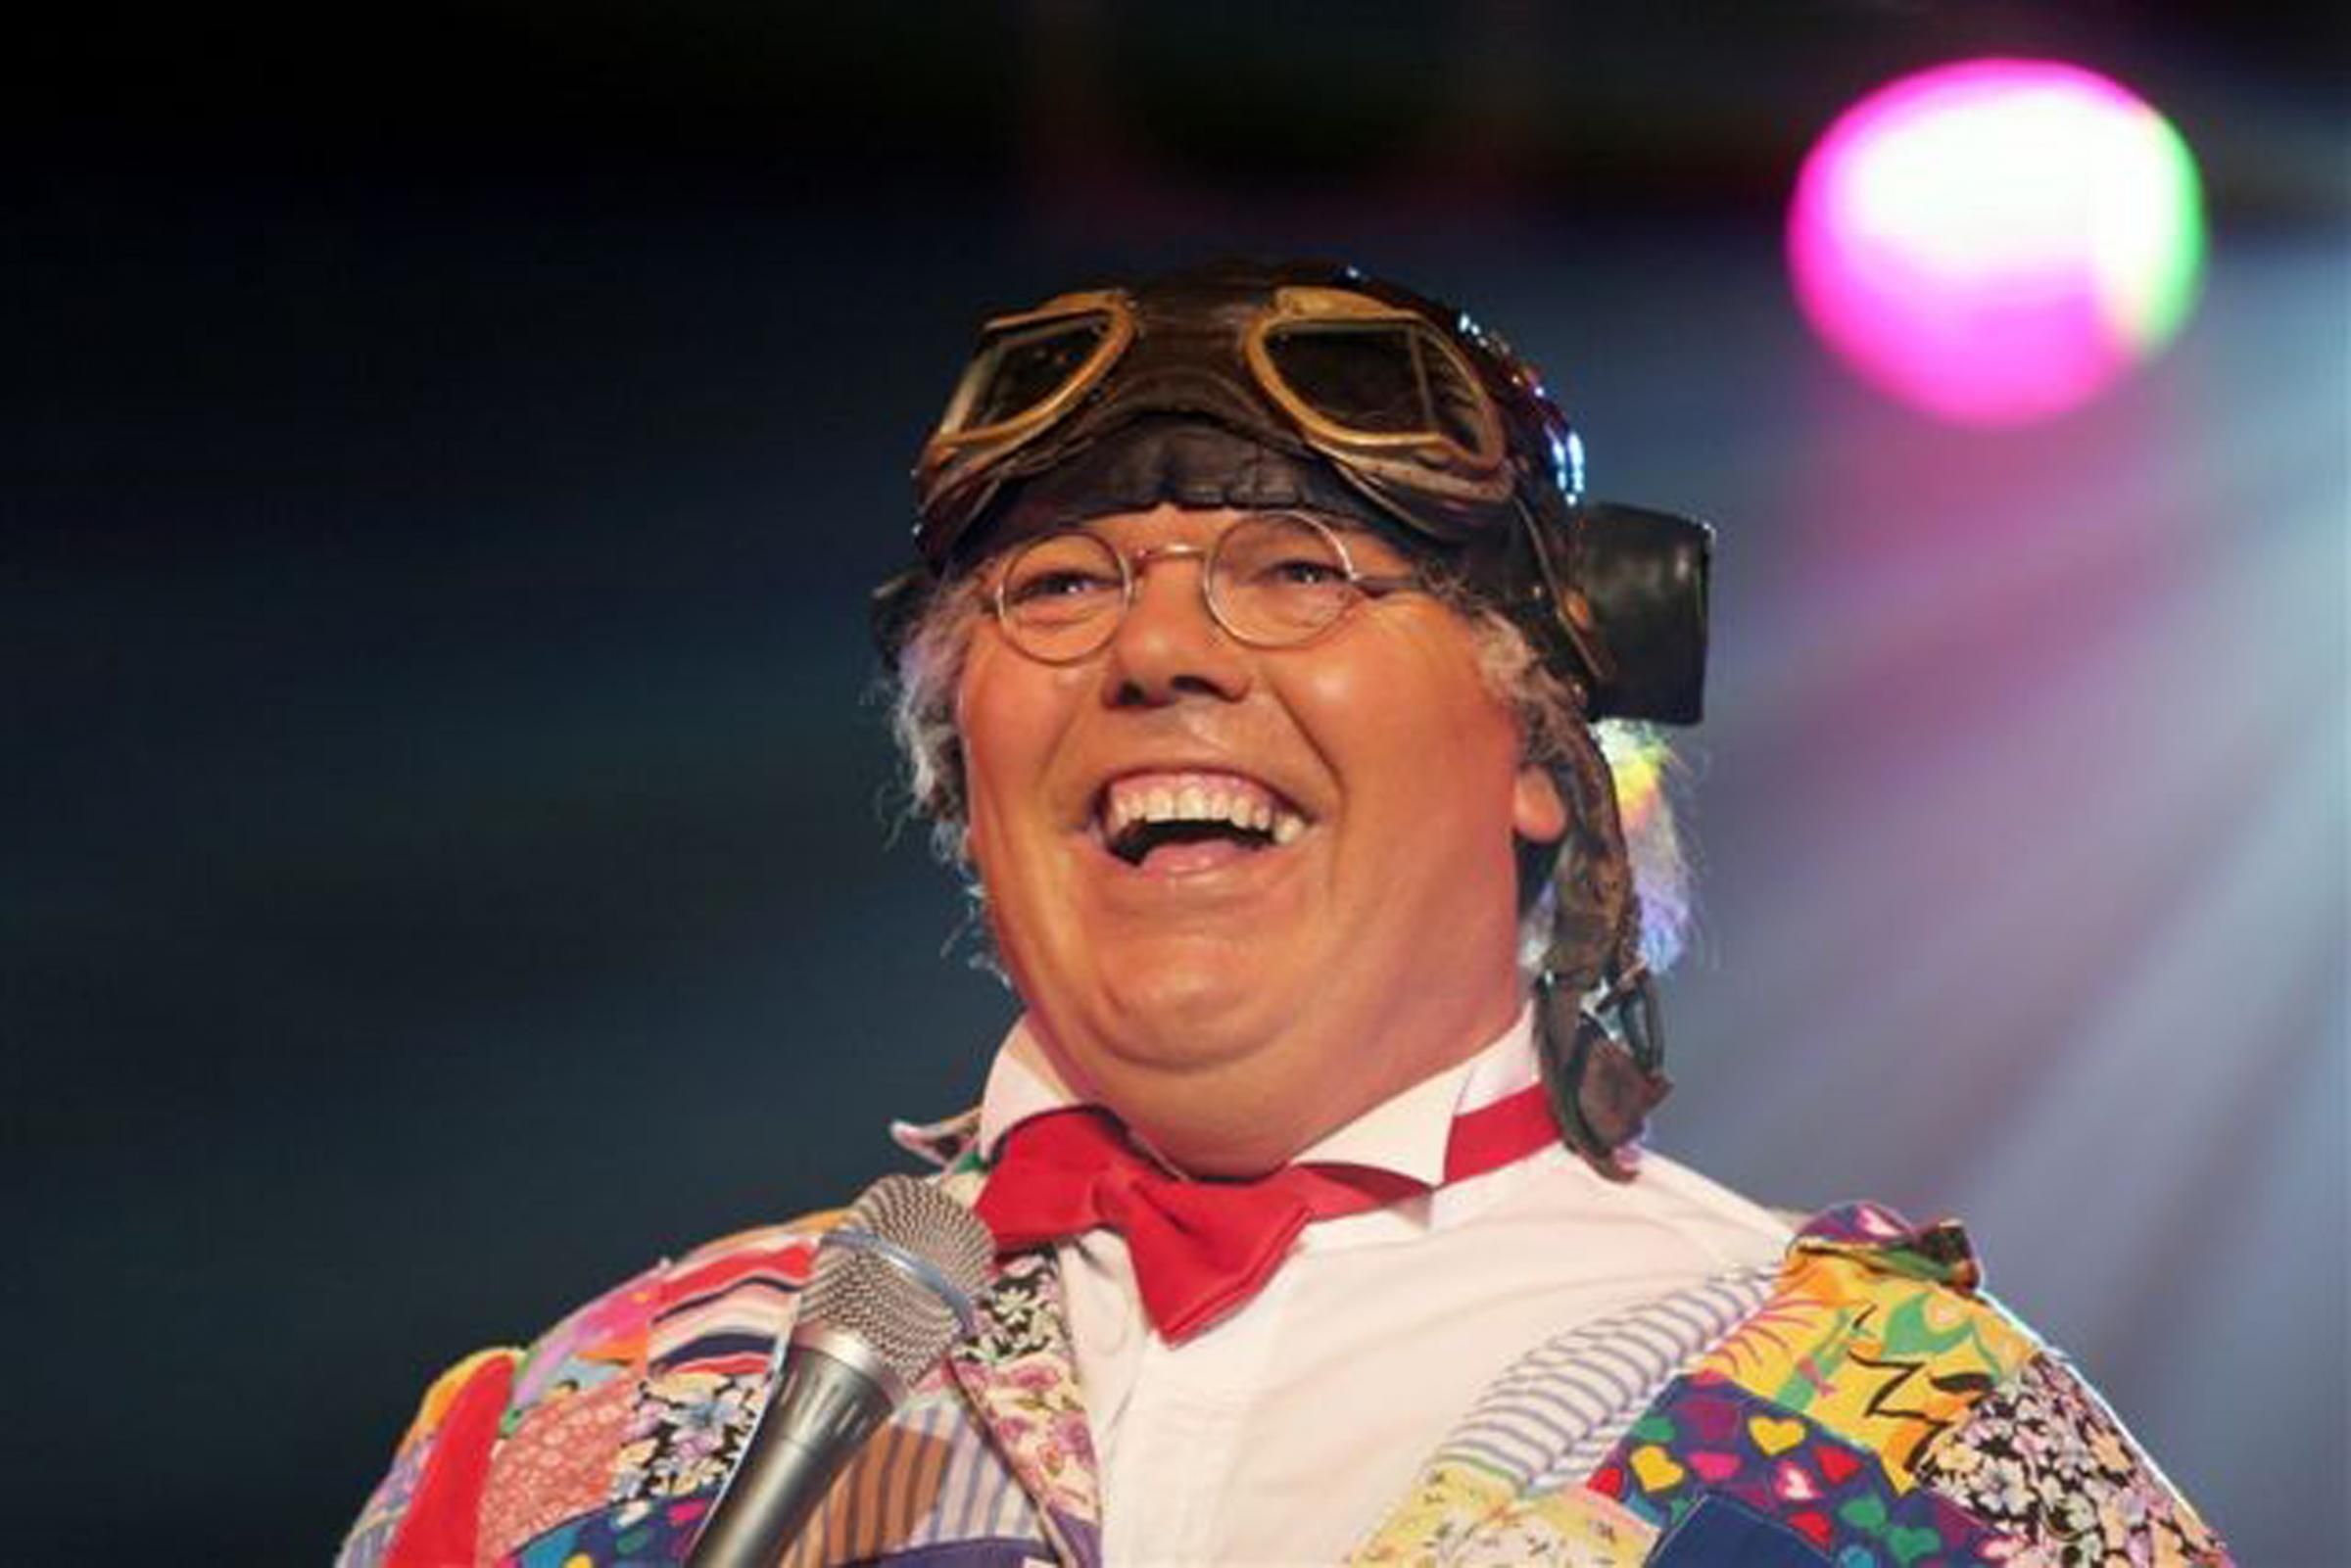 Squeak reccomend Roy chubby brown on tour